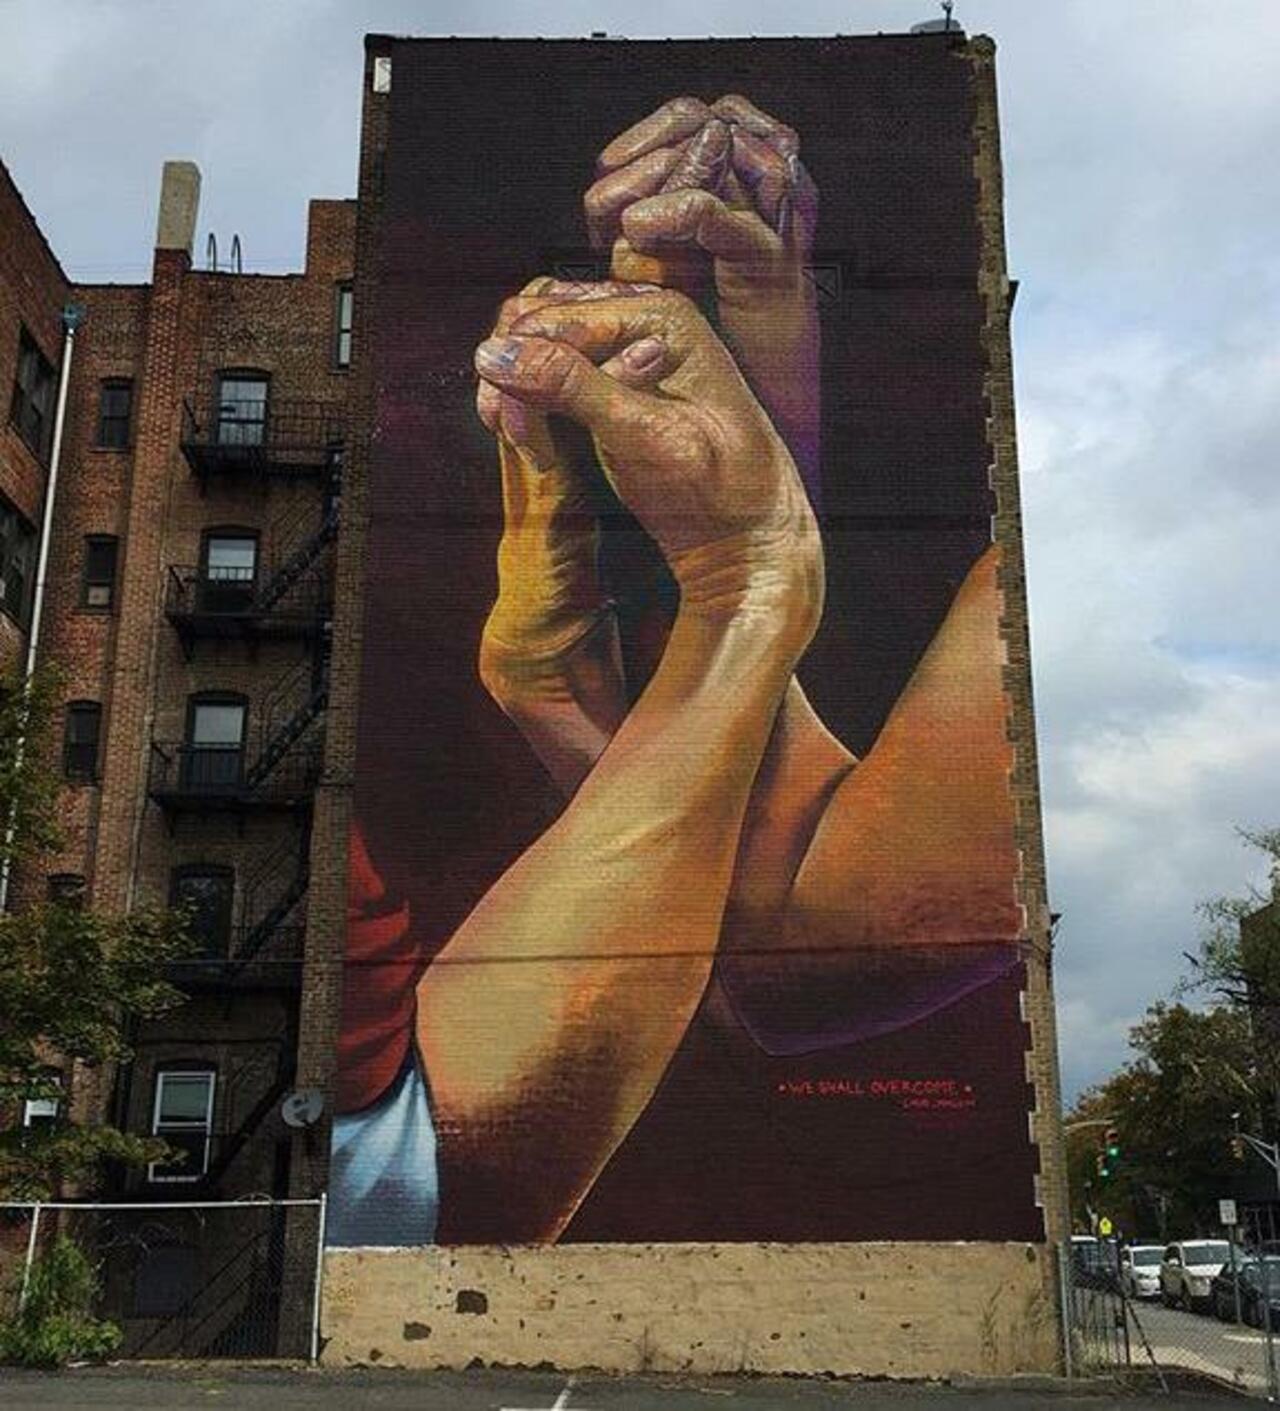 New Street Art by CaseMaclaim in Jersey City for the TheBKcollective 

#art #graffiti #mural #streetart http://t.co/y30XcFMwtV